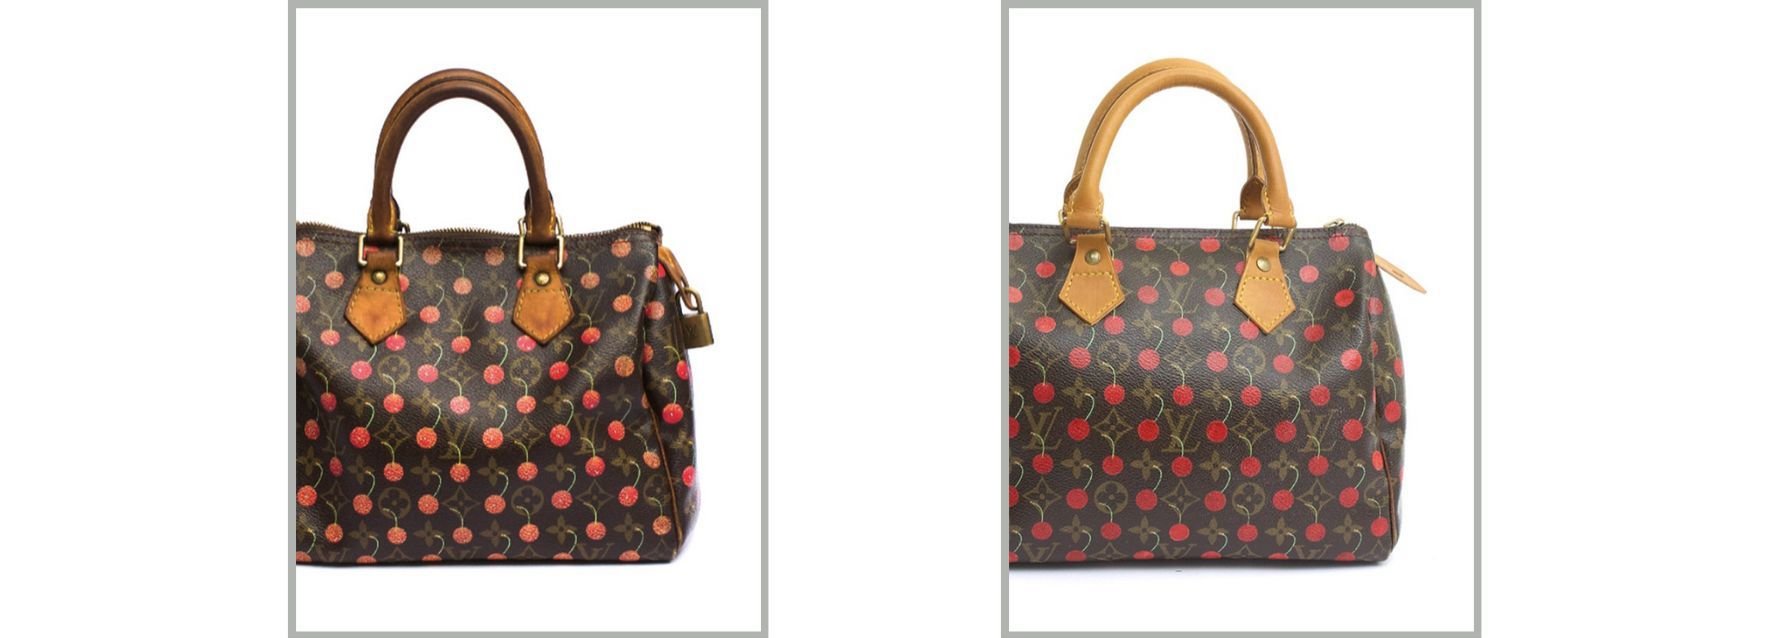 Louis Vuitton Has Seriously Expanded Its Selection of Exotic Bags